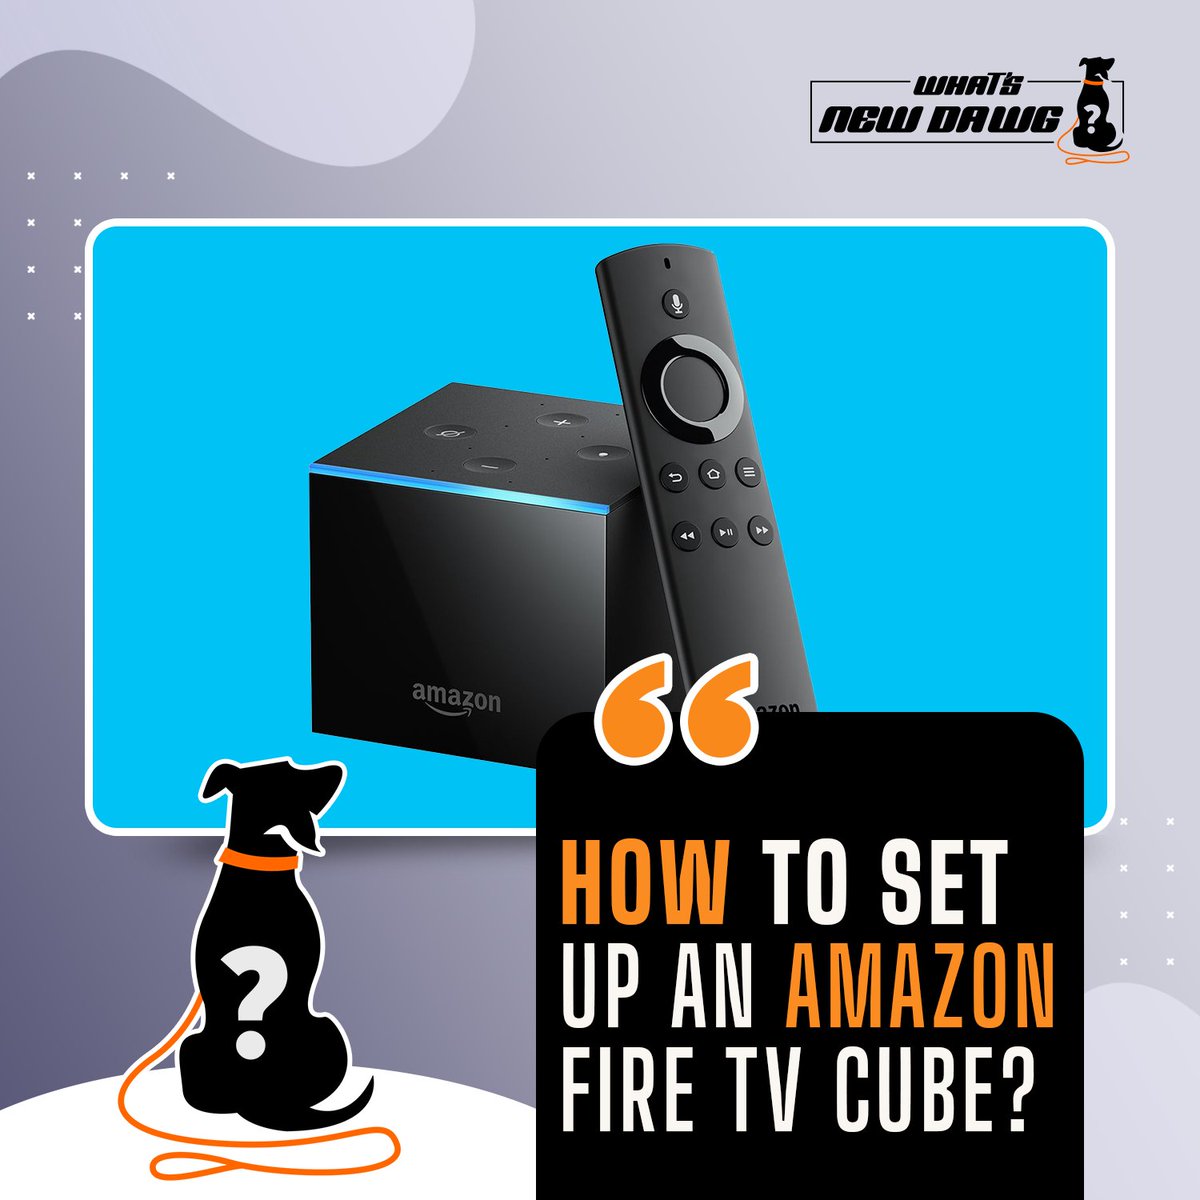 Wrap you way around the new technology by following this Amazon FireTV Cube setup guide - bit.ly/setup-firetv
.
.
#whatsnewdawg #howtosetup #setupguide #setupamazon #amazonfirecube #amazonfirestick #firetvcube #firetvstick #blogs #blogspot #blogposts #blogpostarticle